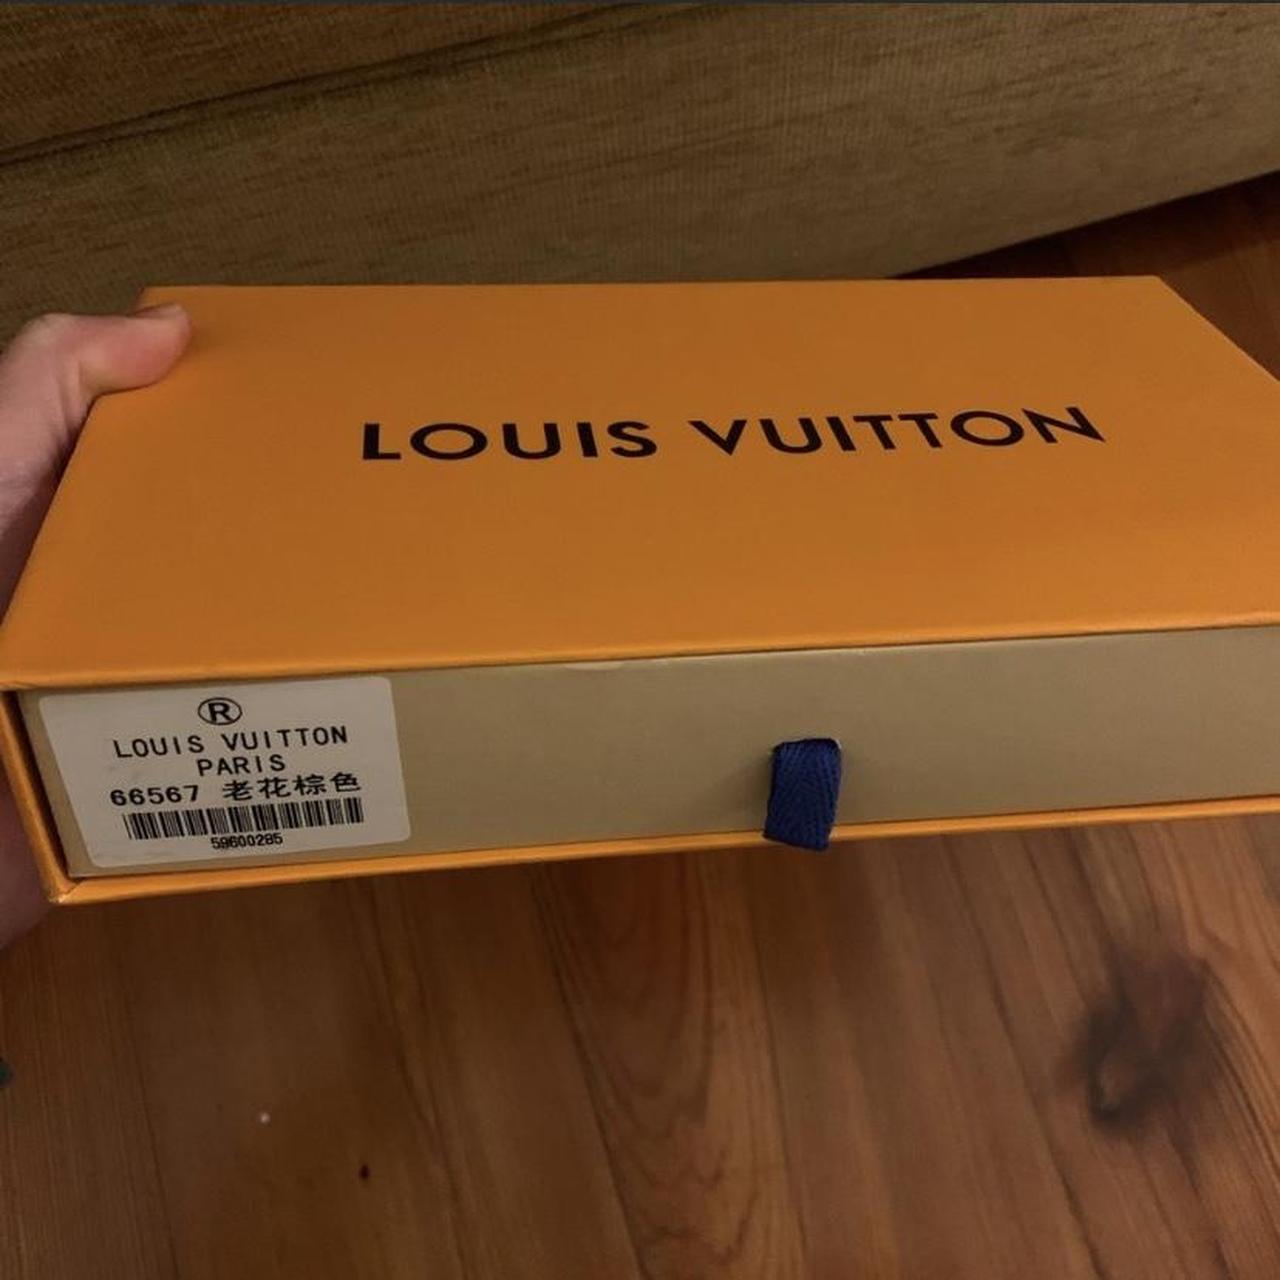 DESIGNER Louis Vuitton Small Packaging Box with Case - Depop